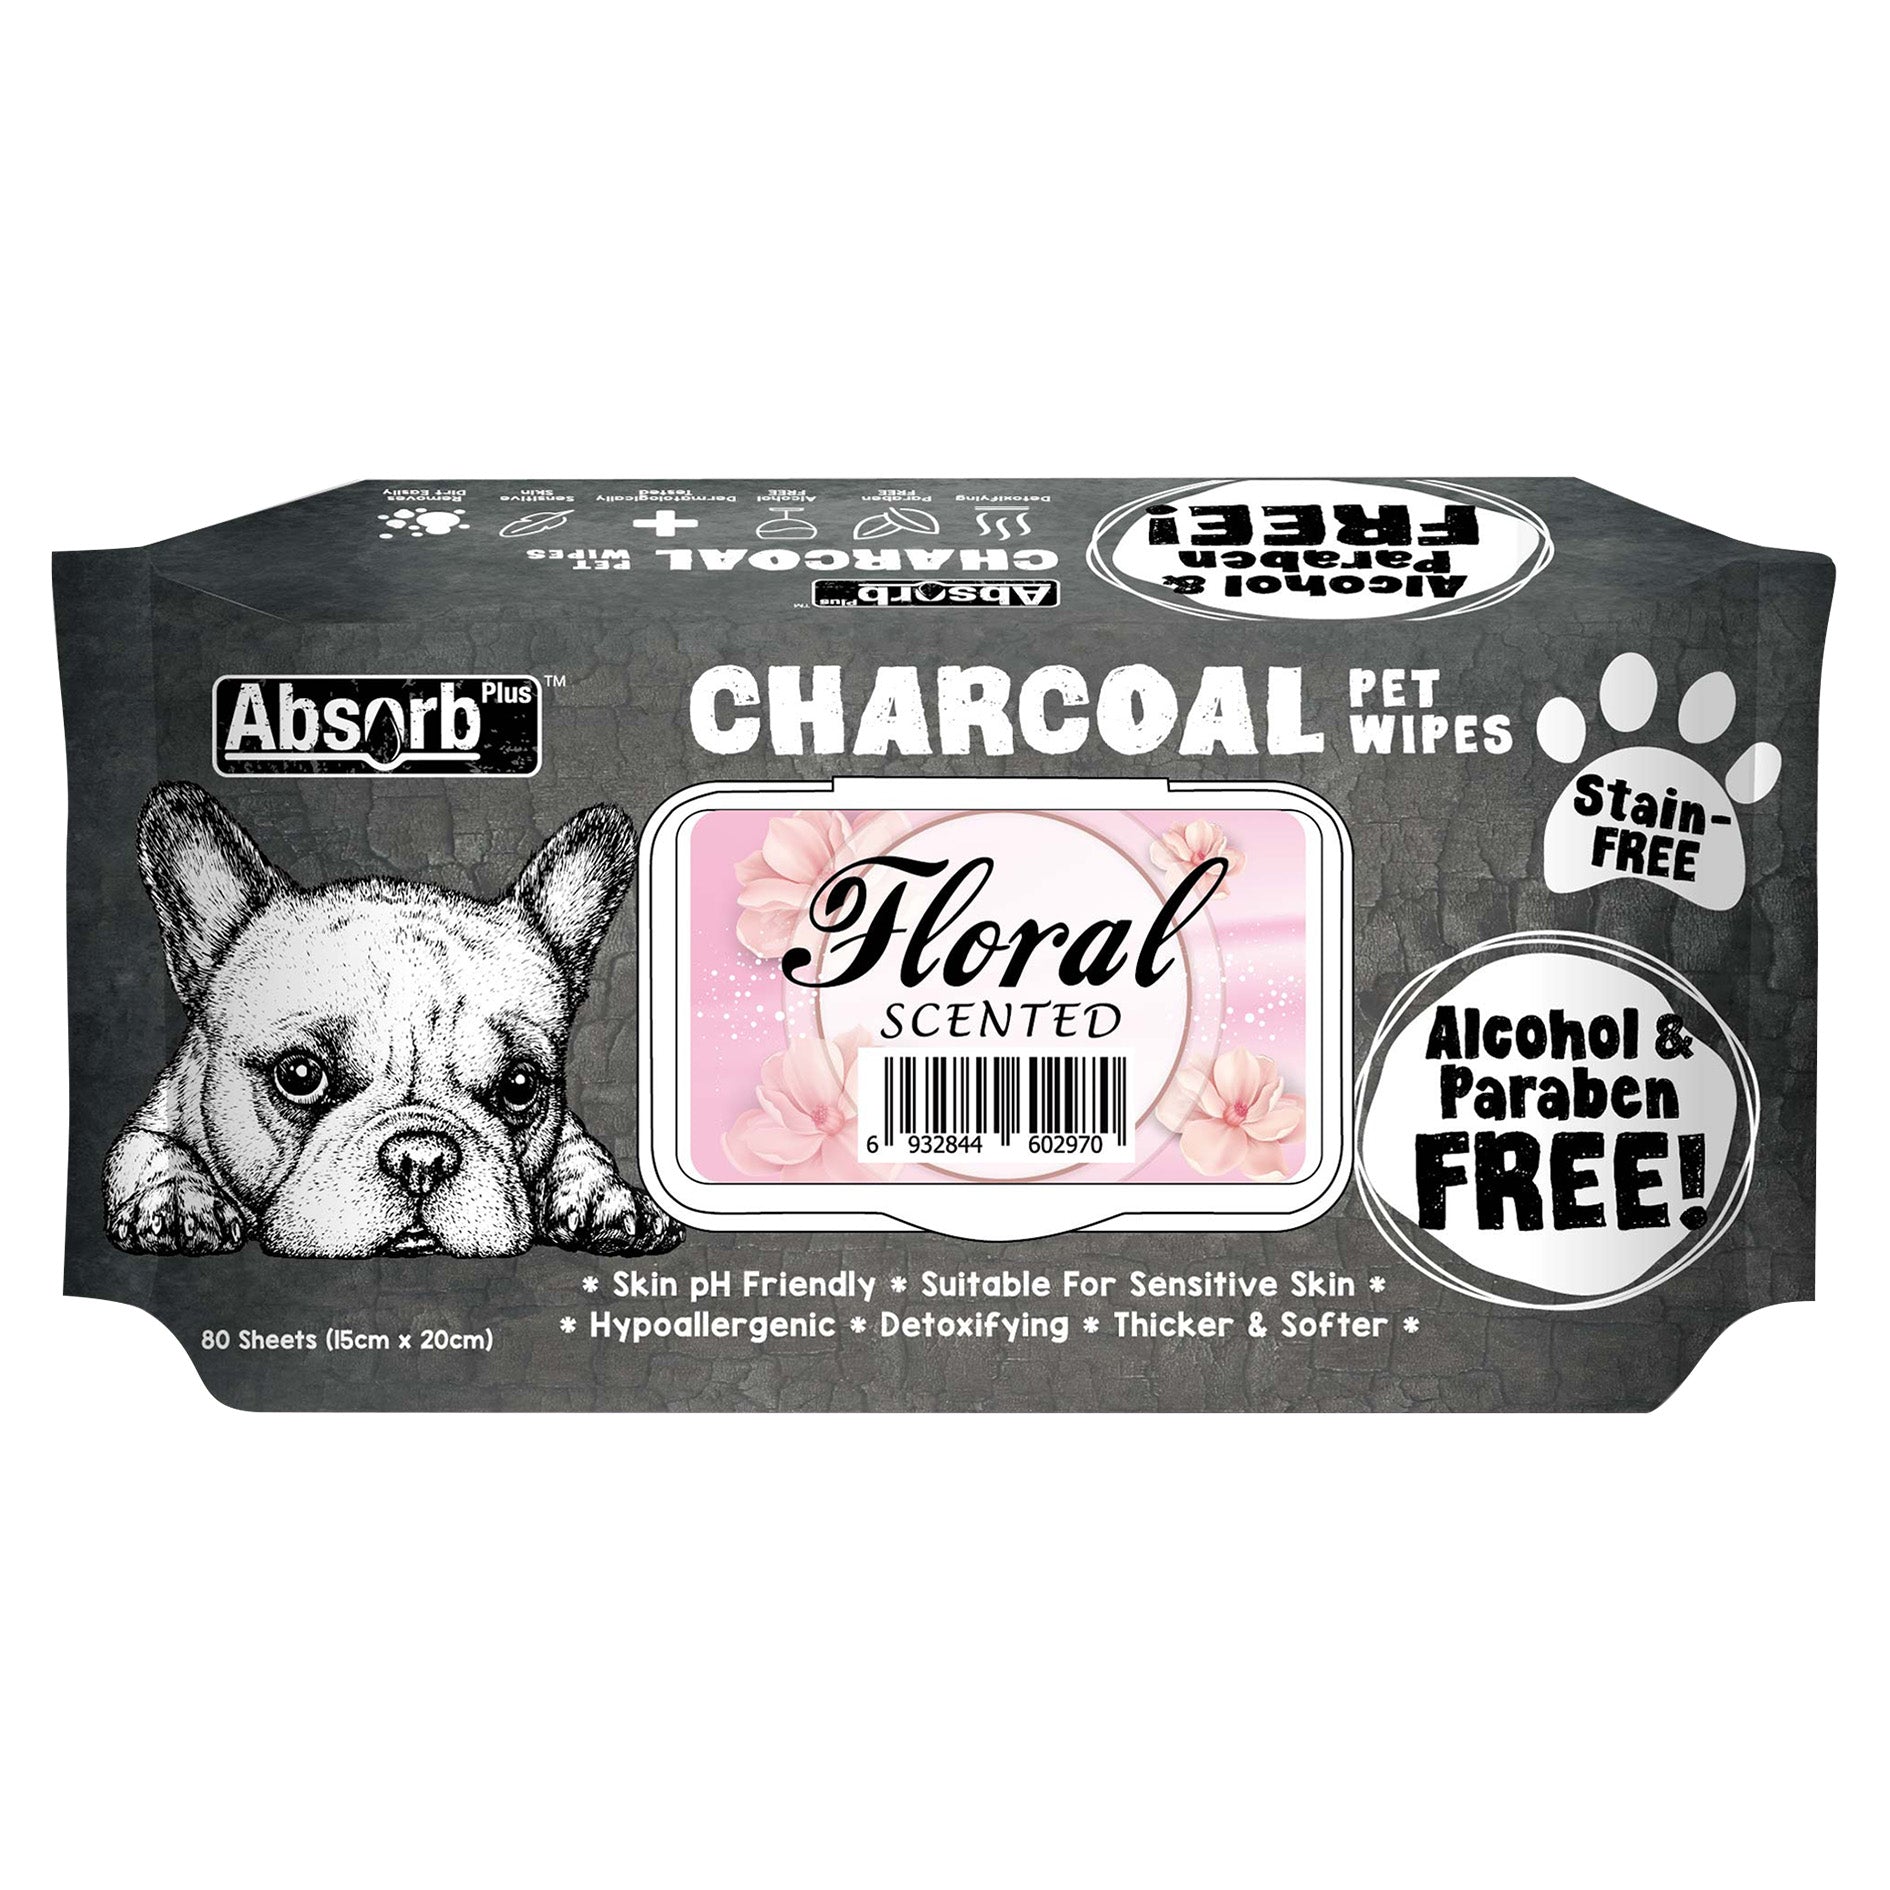 Absorb Plus Charcoal Wet Wipes - Floral (6968587616417)